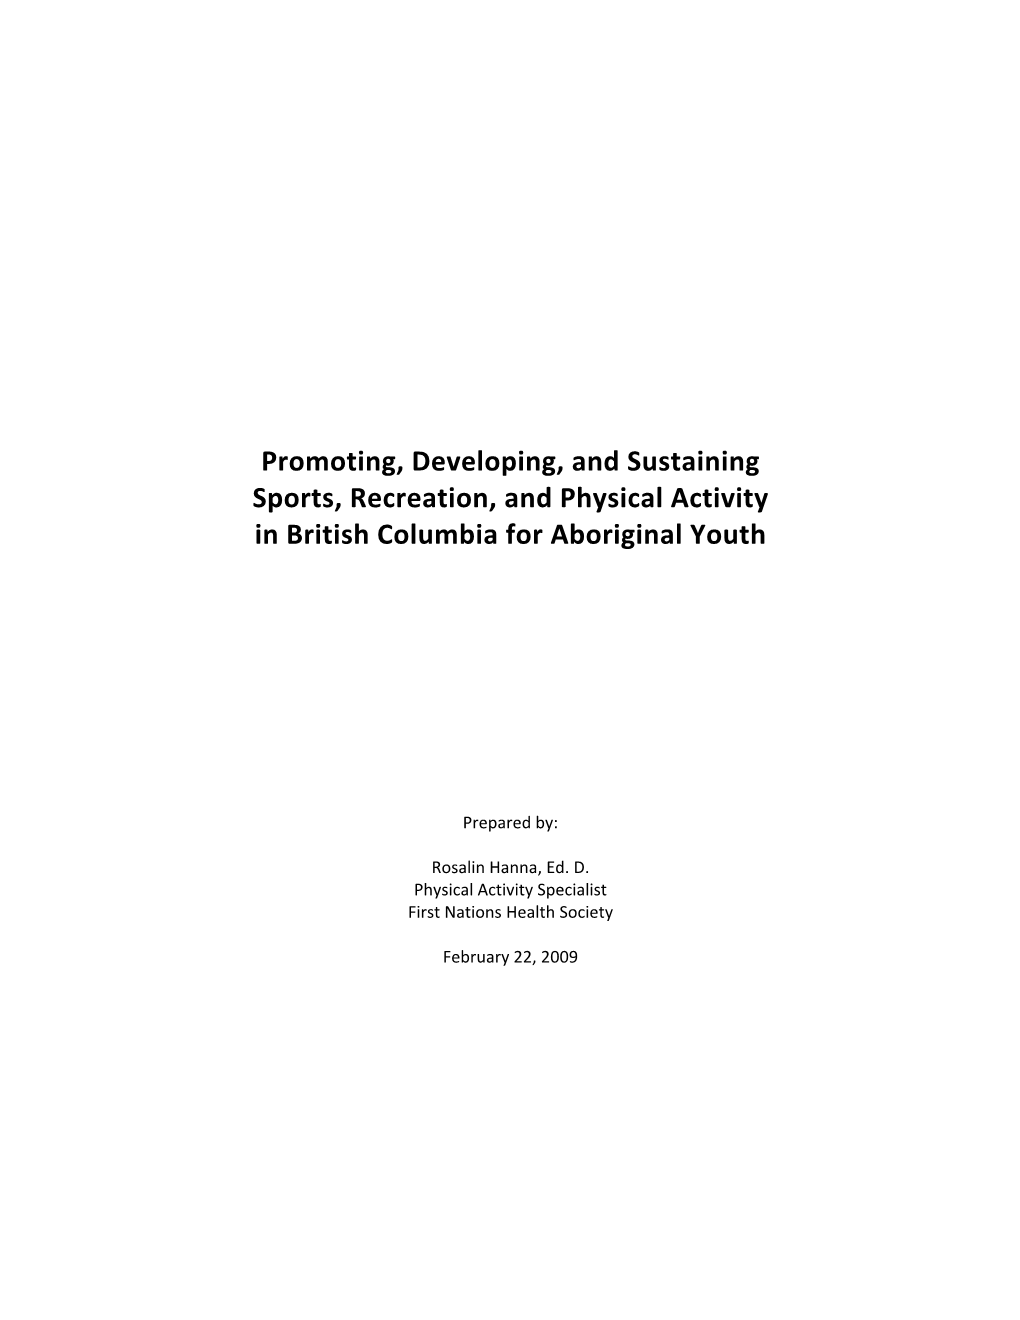 Promoting, Developing, and Sustaining Sports, Recreation, and Physical Activity in British Columbia for Aboriginal Youth